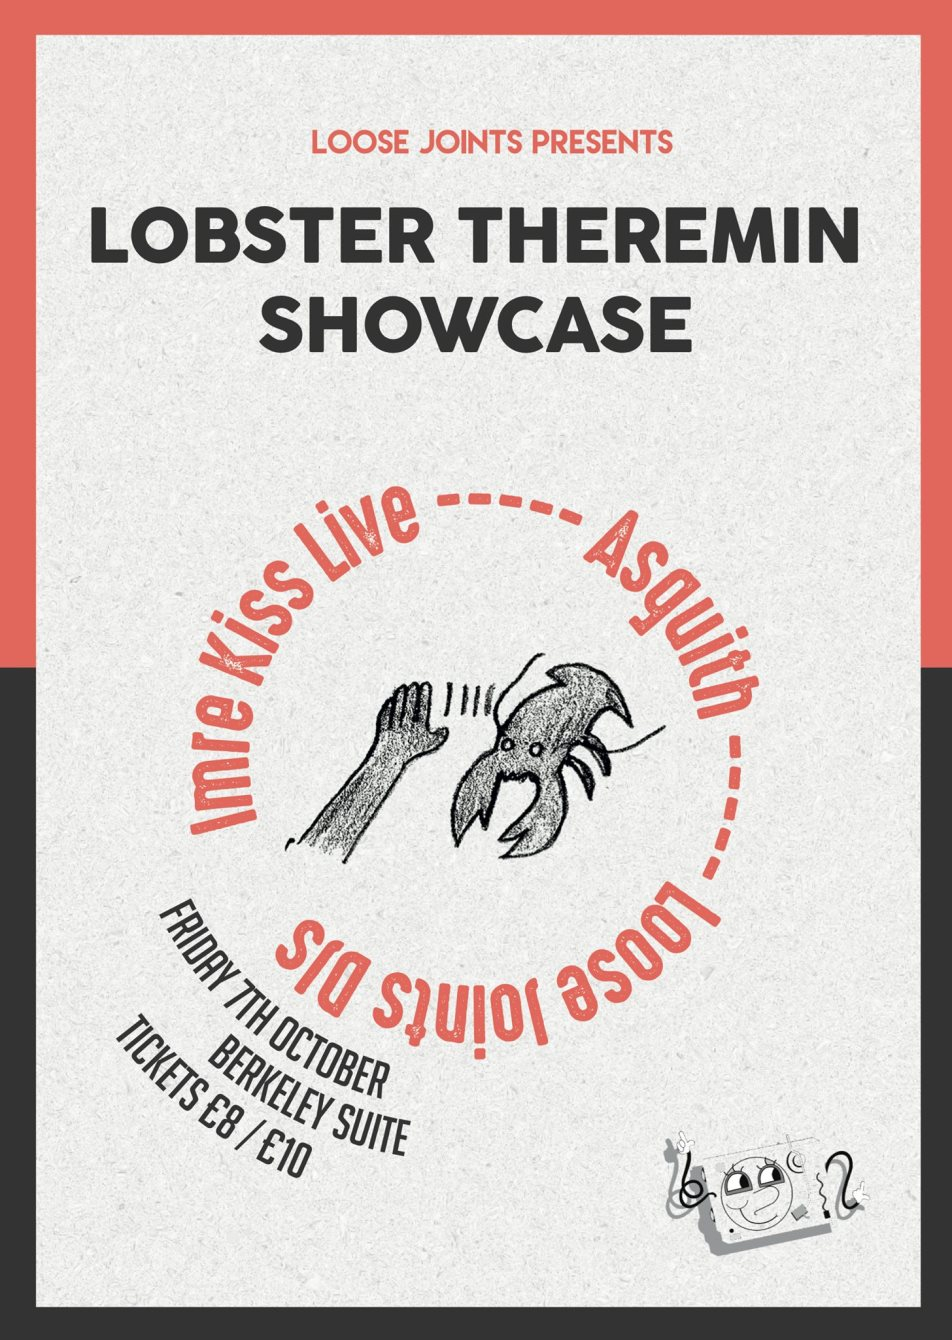 Loose Joints: Lobster Theremin Showcase - Flyer front